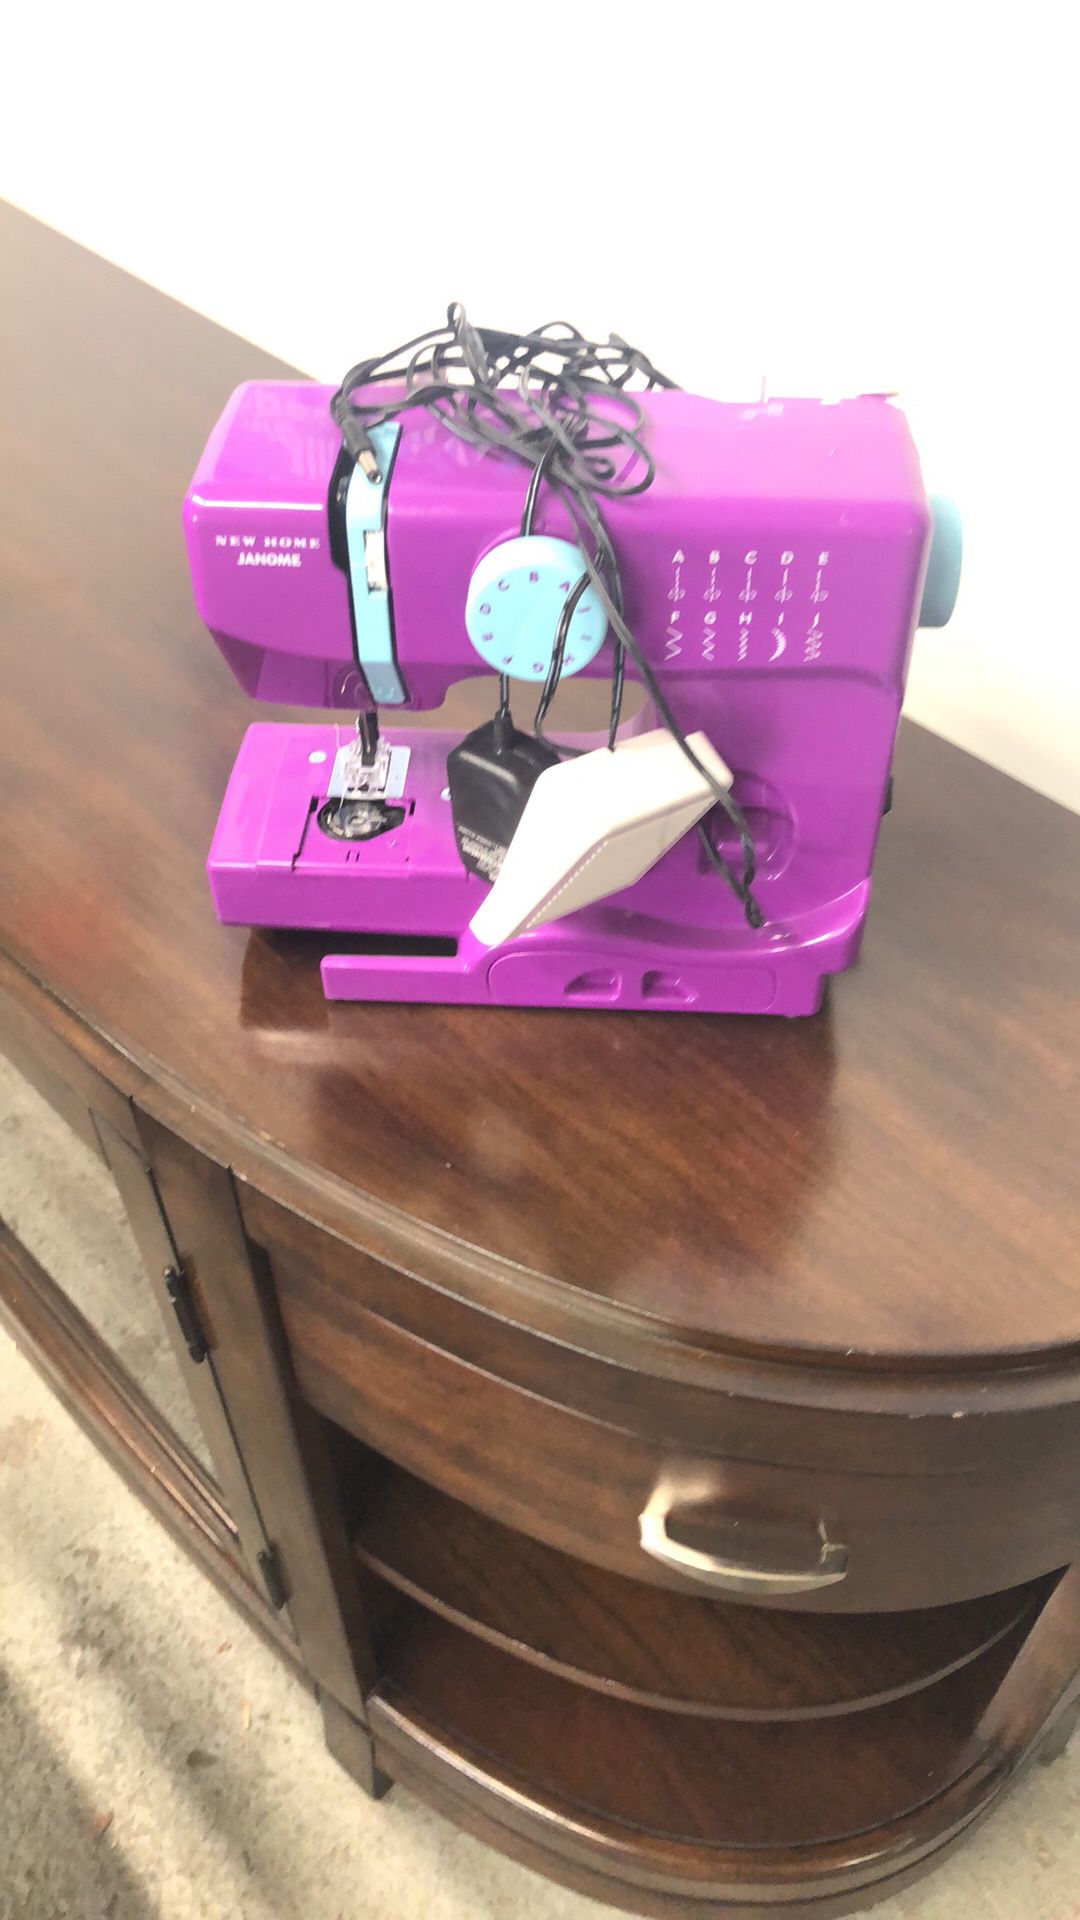 Good working condition sewing machine